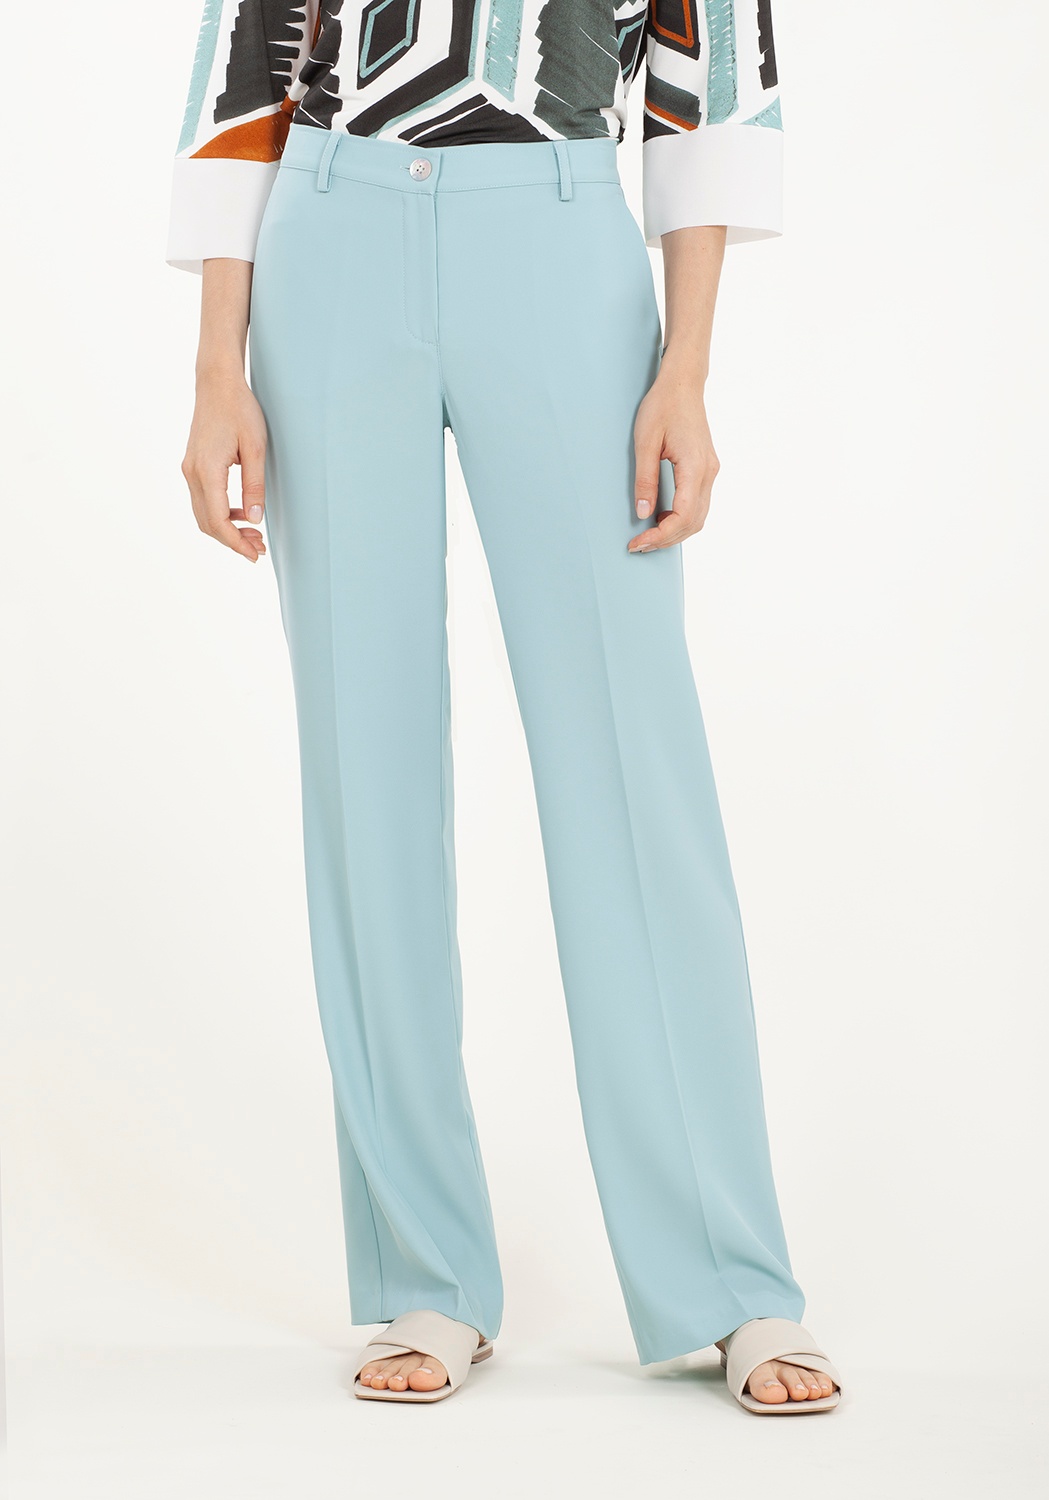 Straight Light Blue Trousers